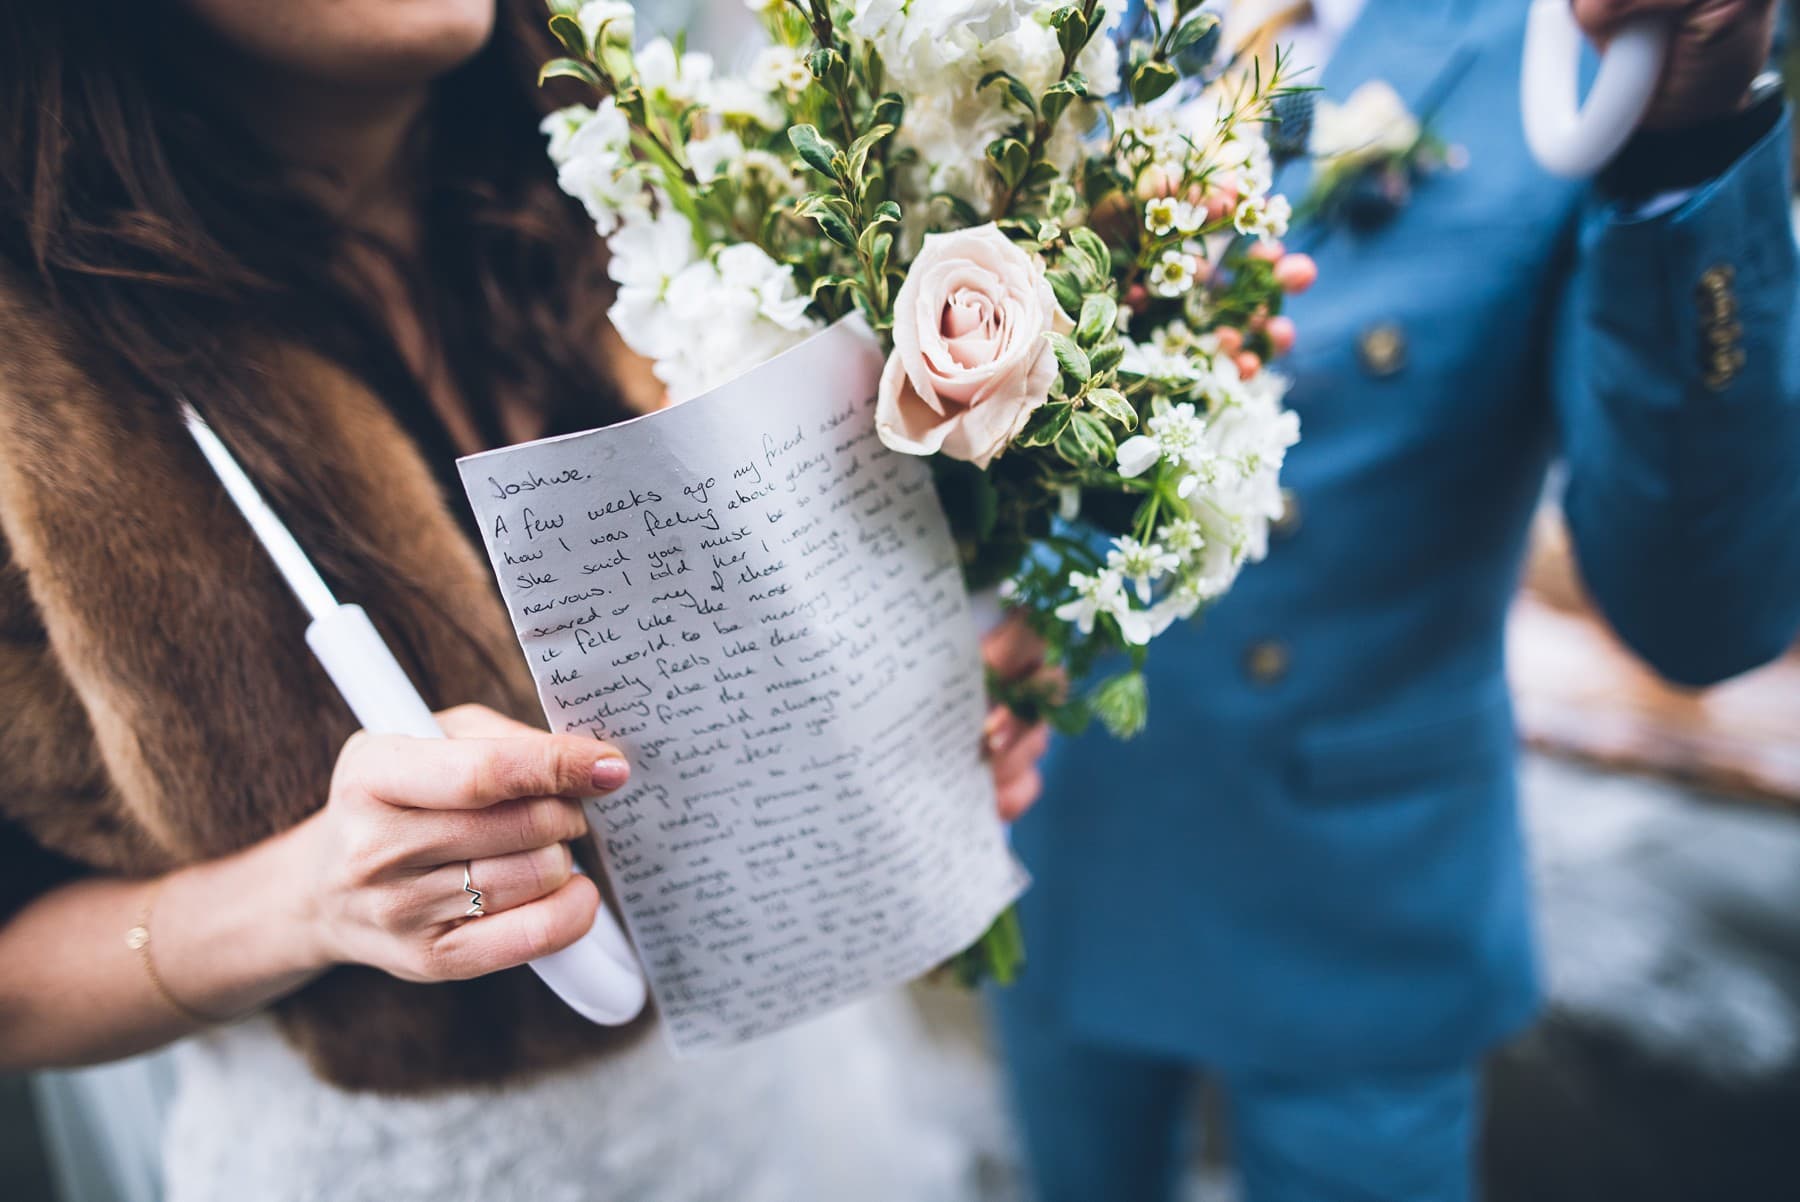 How to write your own vows